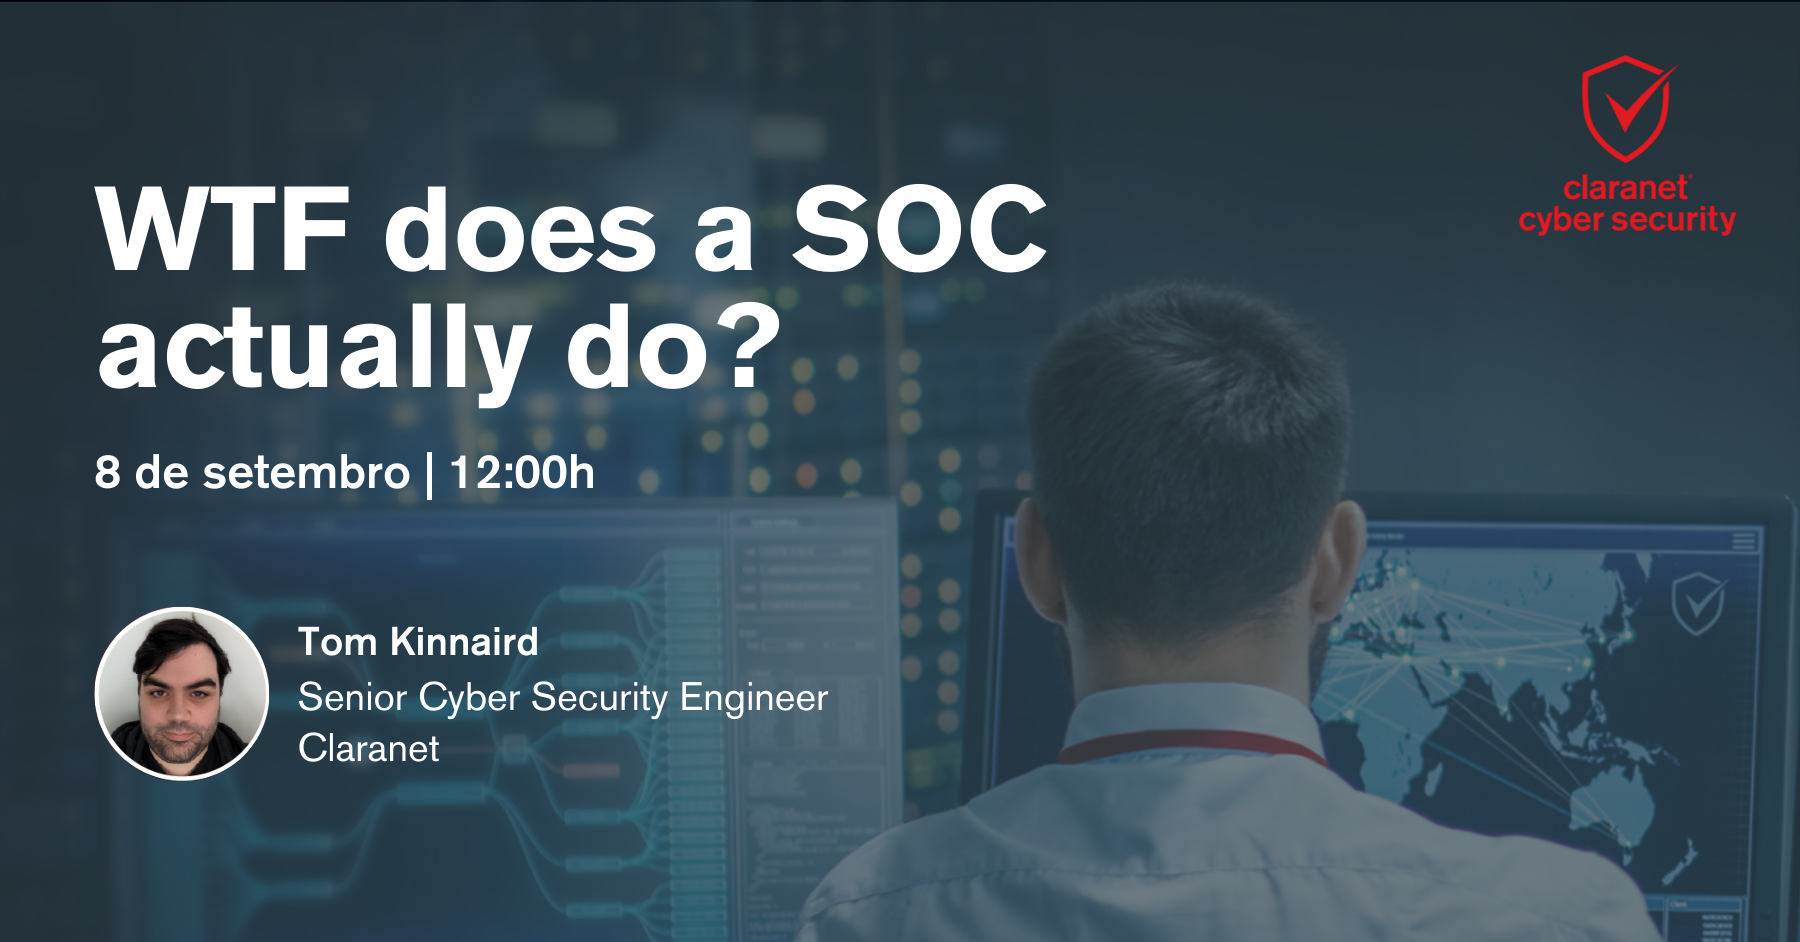 WTF does a SOC actually do?